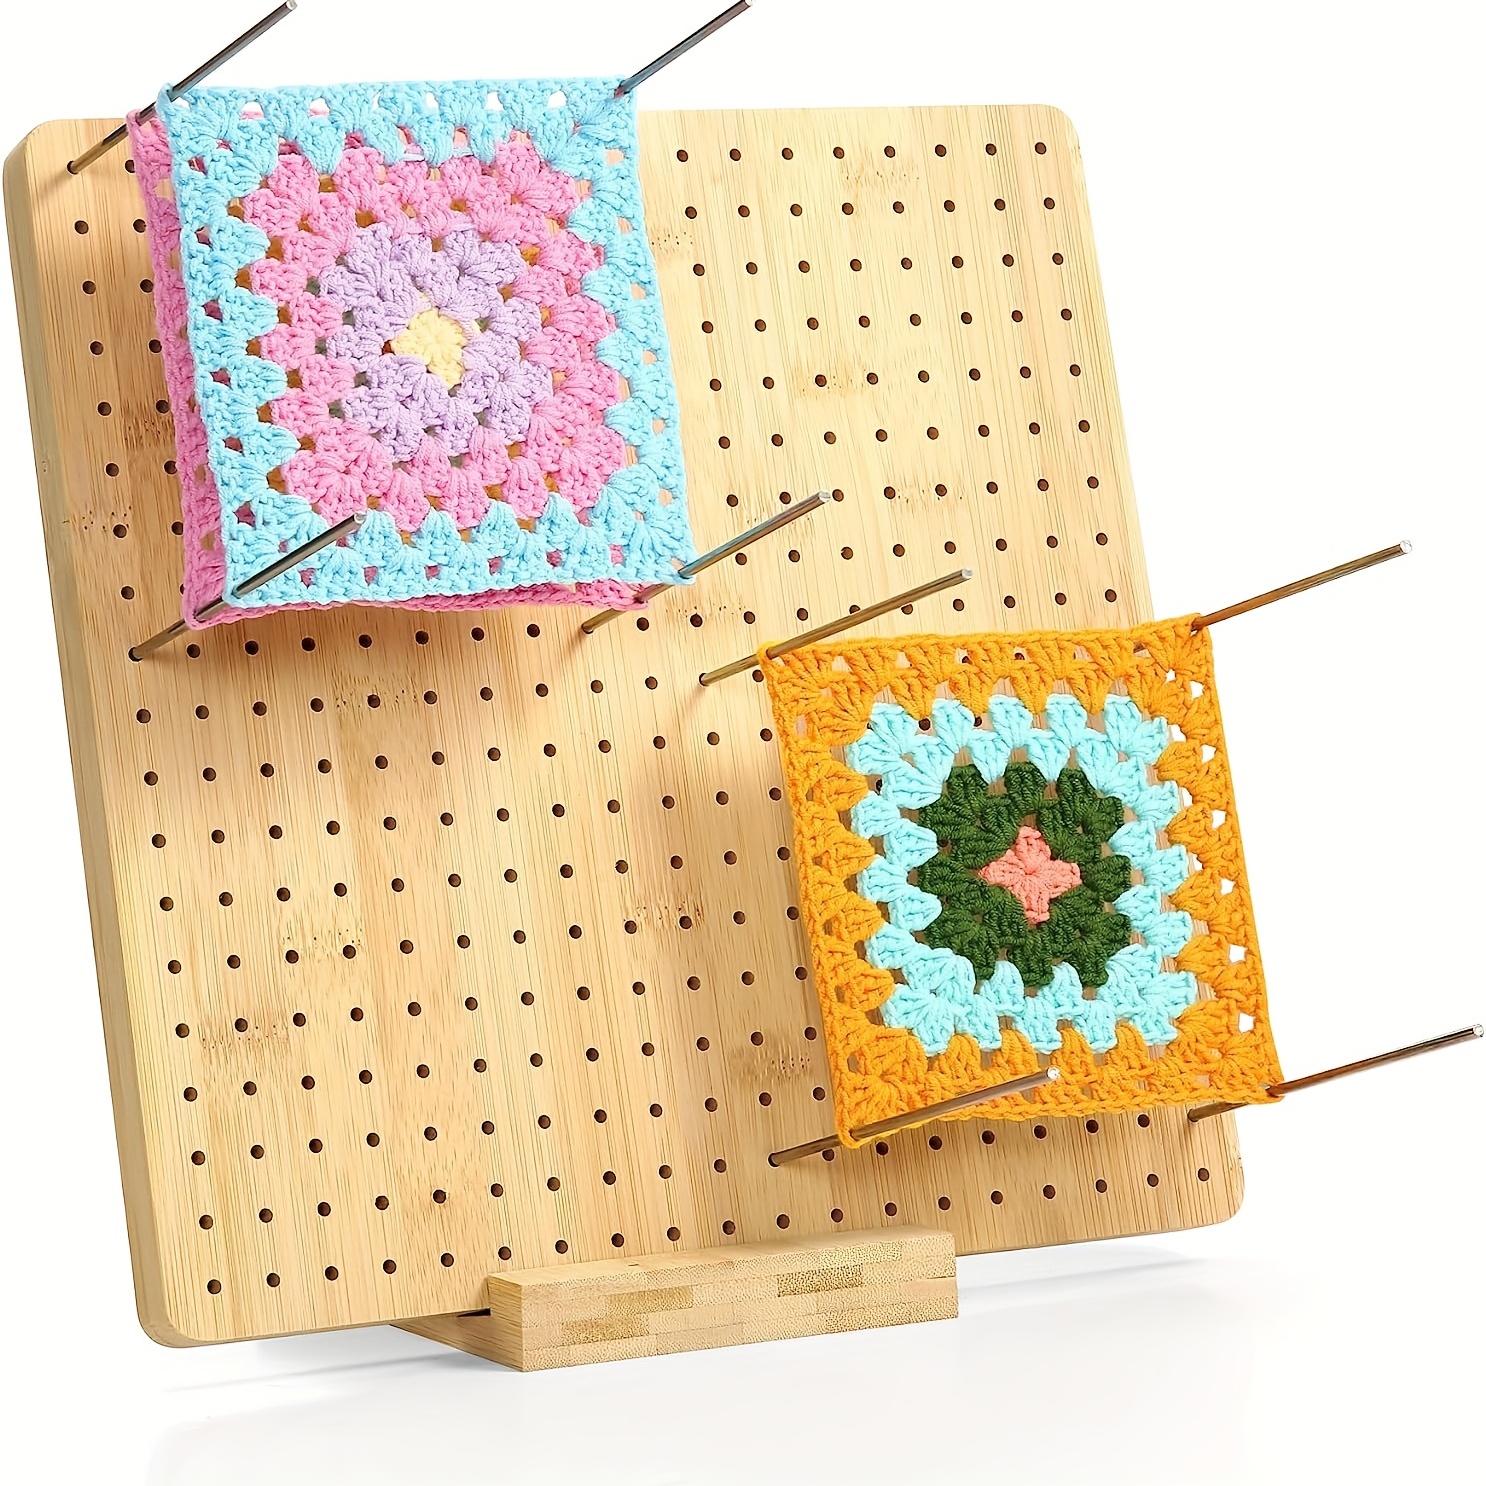 Wooden Blocking Board Crochet Board Full Kit with Stainless Steel Rod Pins for Knitting and Crochet Projects, Men's, Size: 23.5